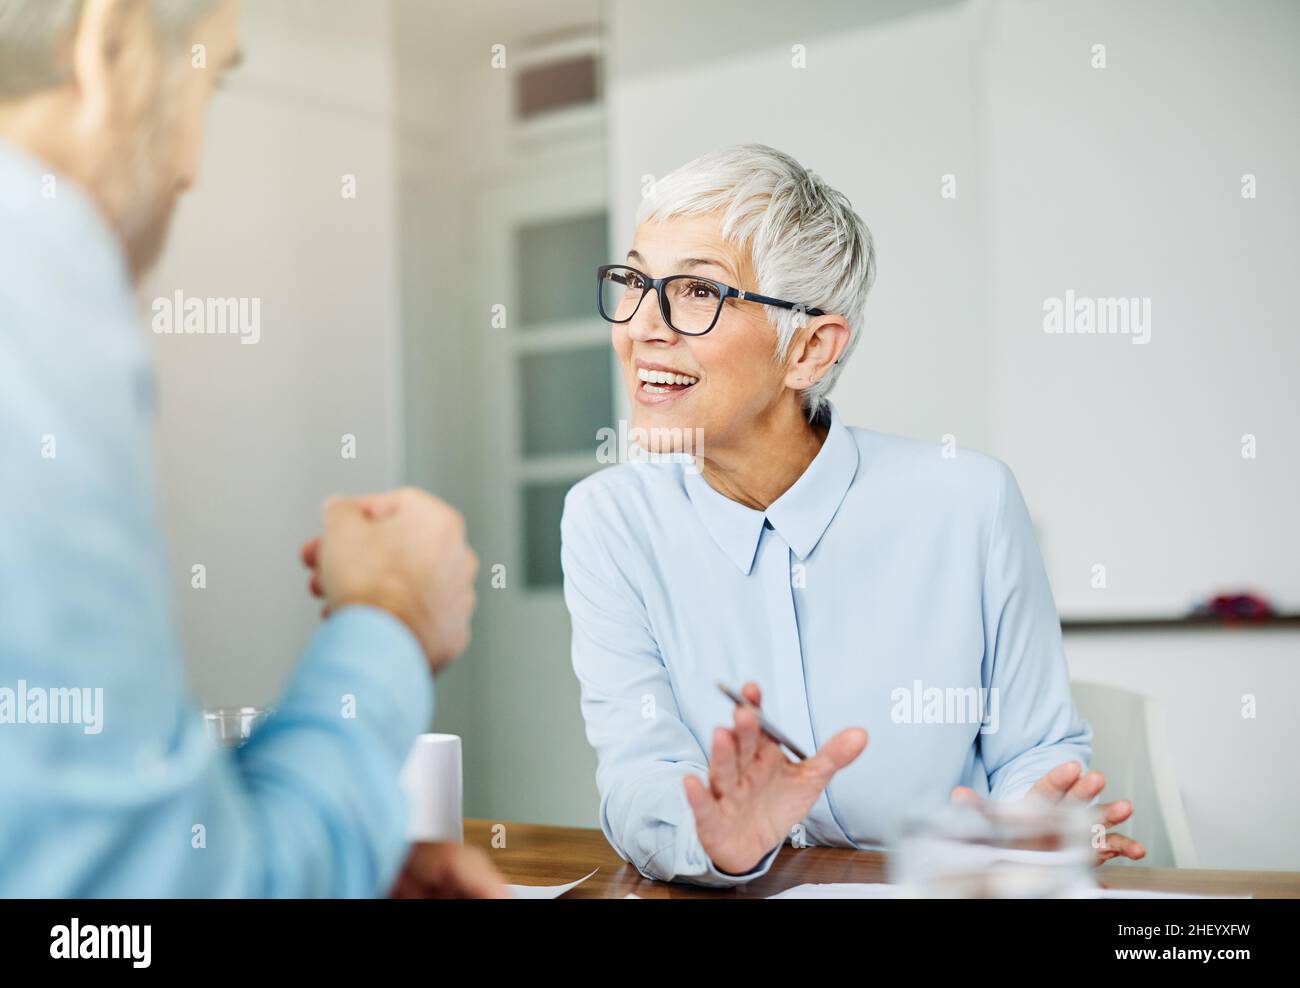 business office person discussion document papers teamwork senior meeting Stock Photo